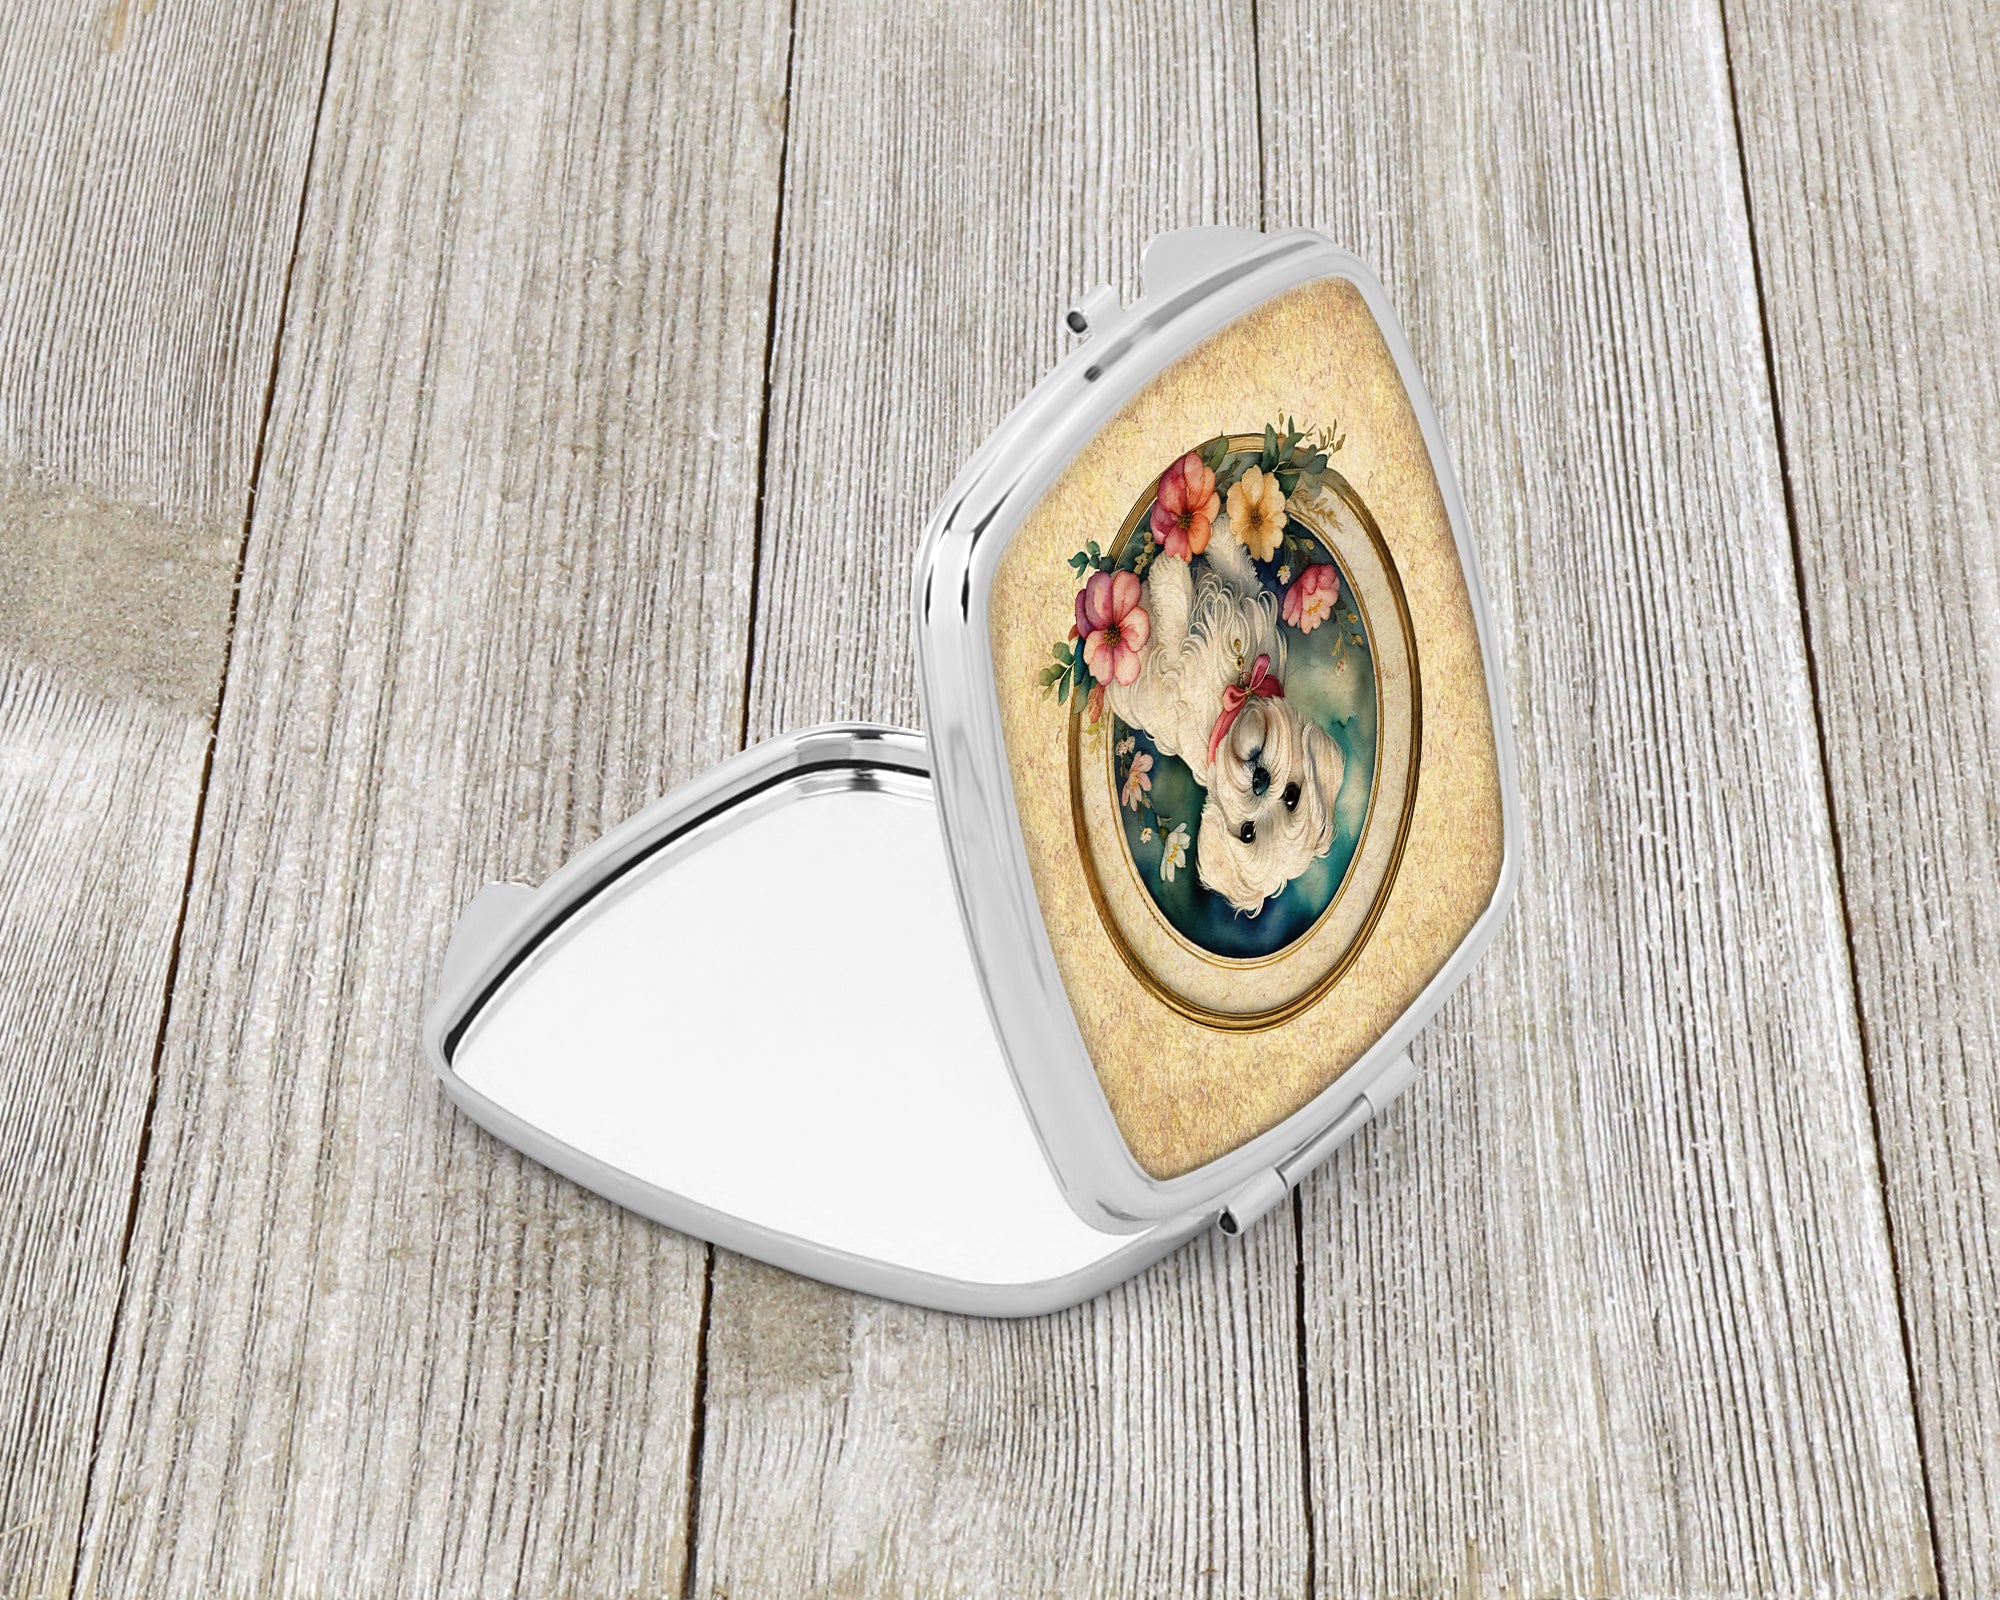 Buy this Maltese and Flowers Compact Mirror